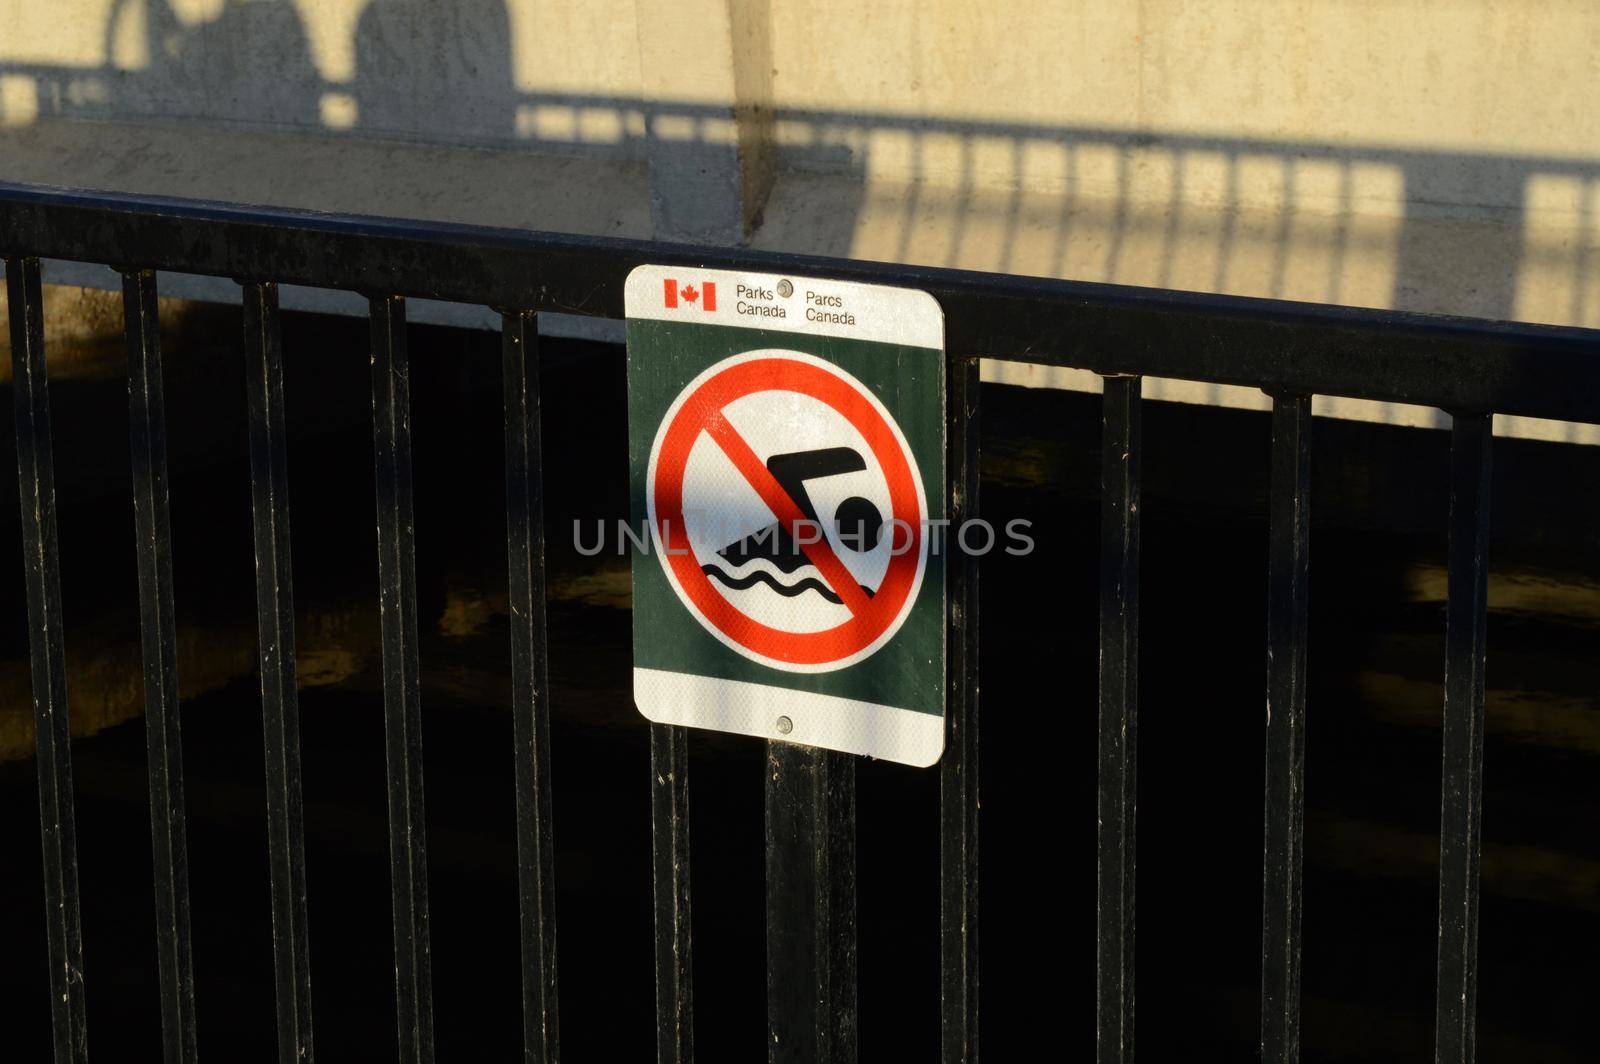 SMITHS FALLS, ONTARIO, CANADA, MARCH 22, 2021: A no swimming sign is posted at the Old Slys Locks water Dam on the Rideau Canal in small town Smiths Falls.